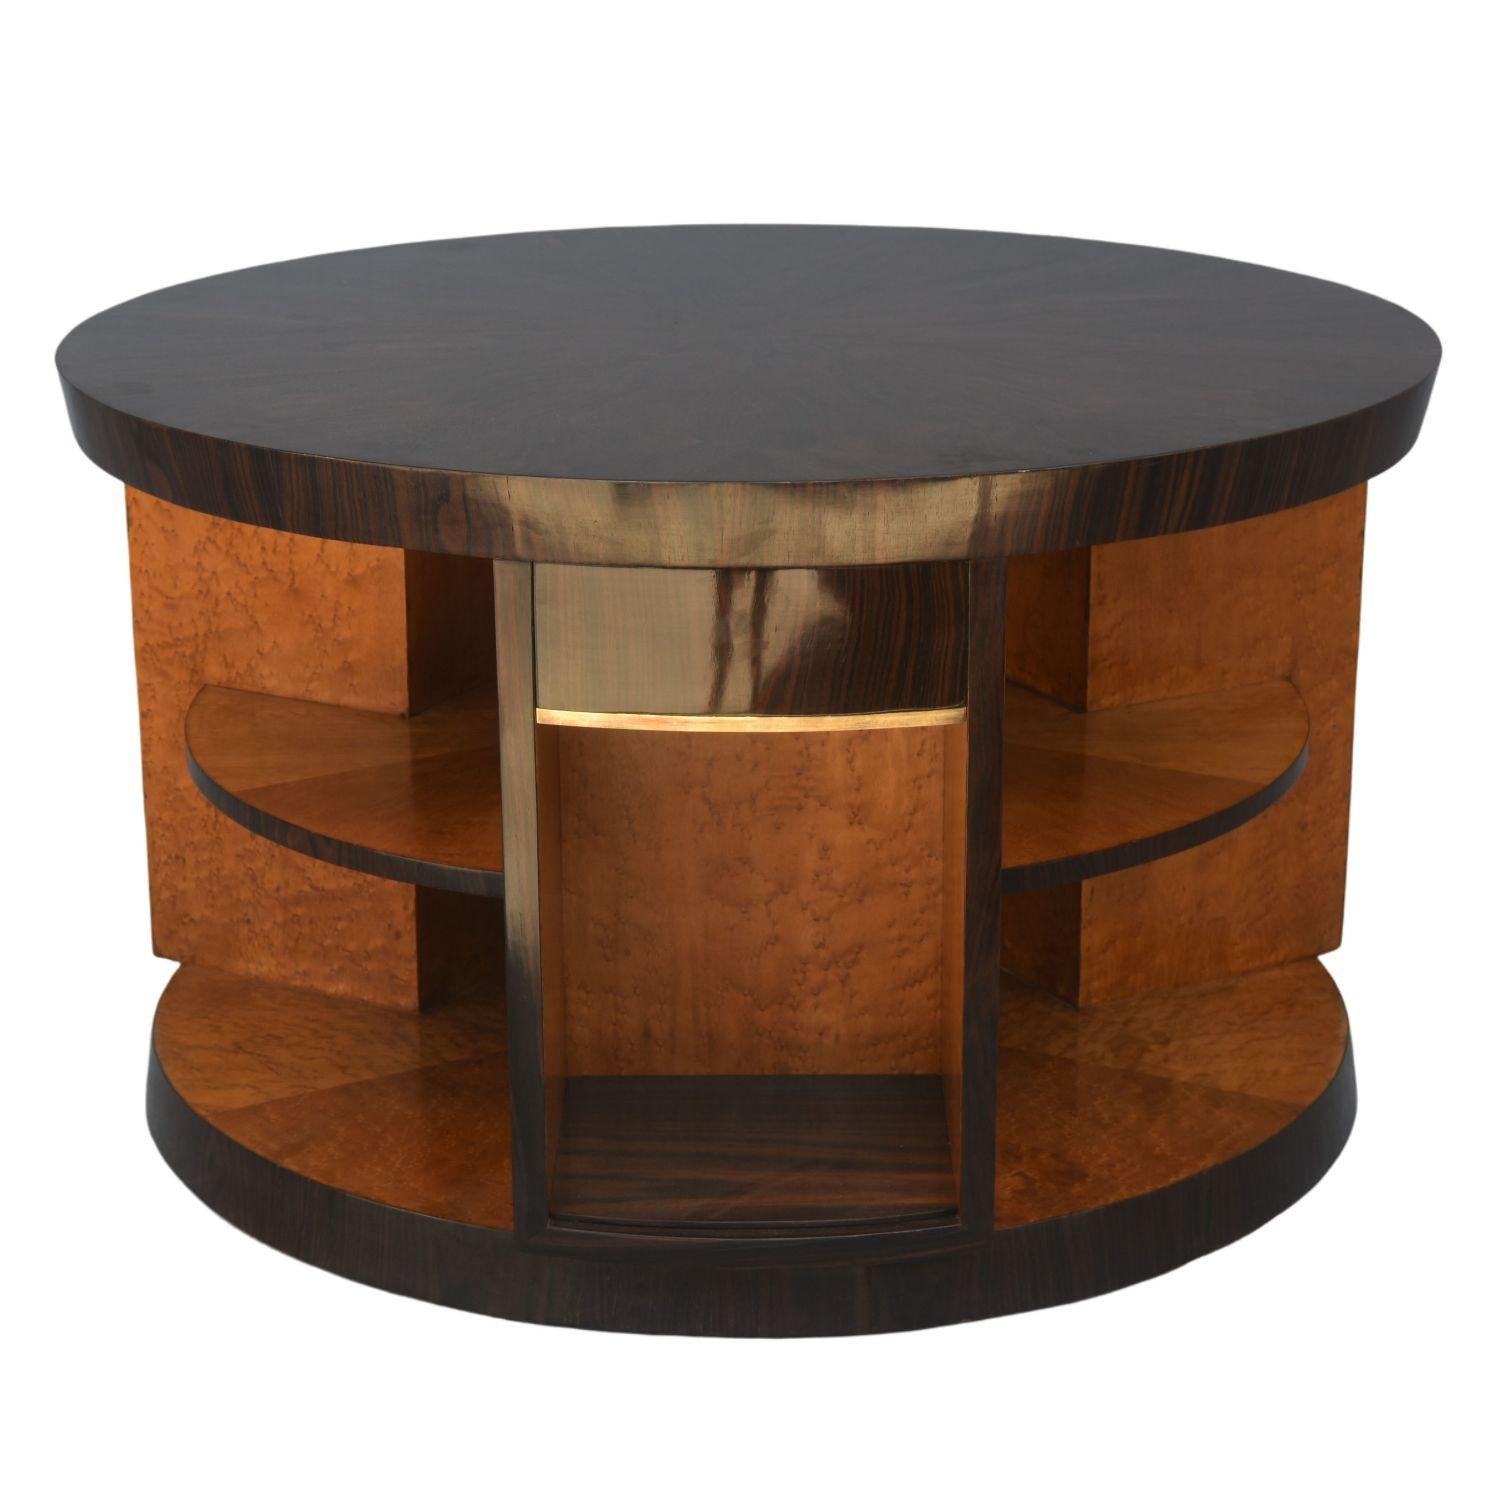 Large library pedestal table in speckled maple Macassar ebony veneer and brass in perfect condition. 3 compartments and 3 drawers mounted on oak. Top and base with an inverted bevel. Pedestal table attributable to Eugène Printz or Michel Duffet.